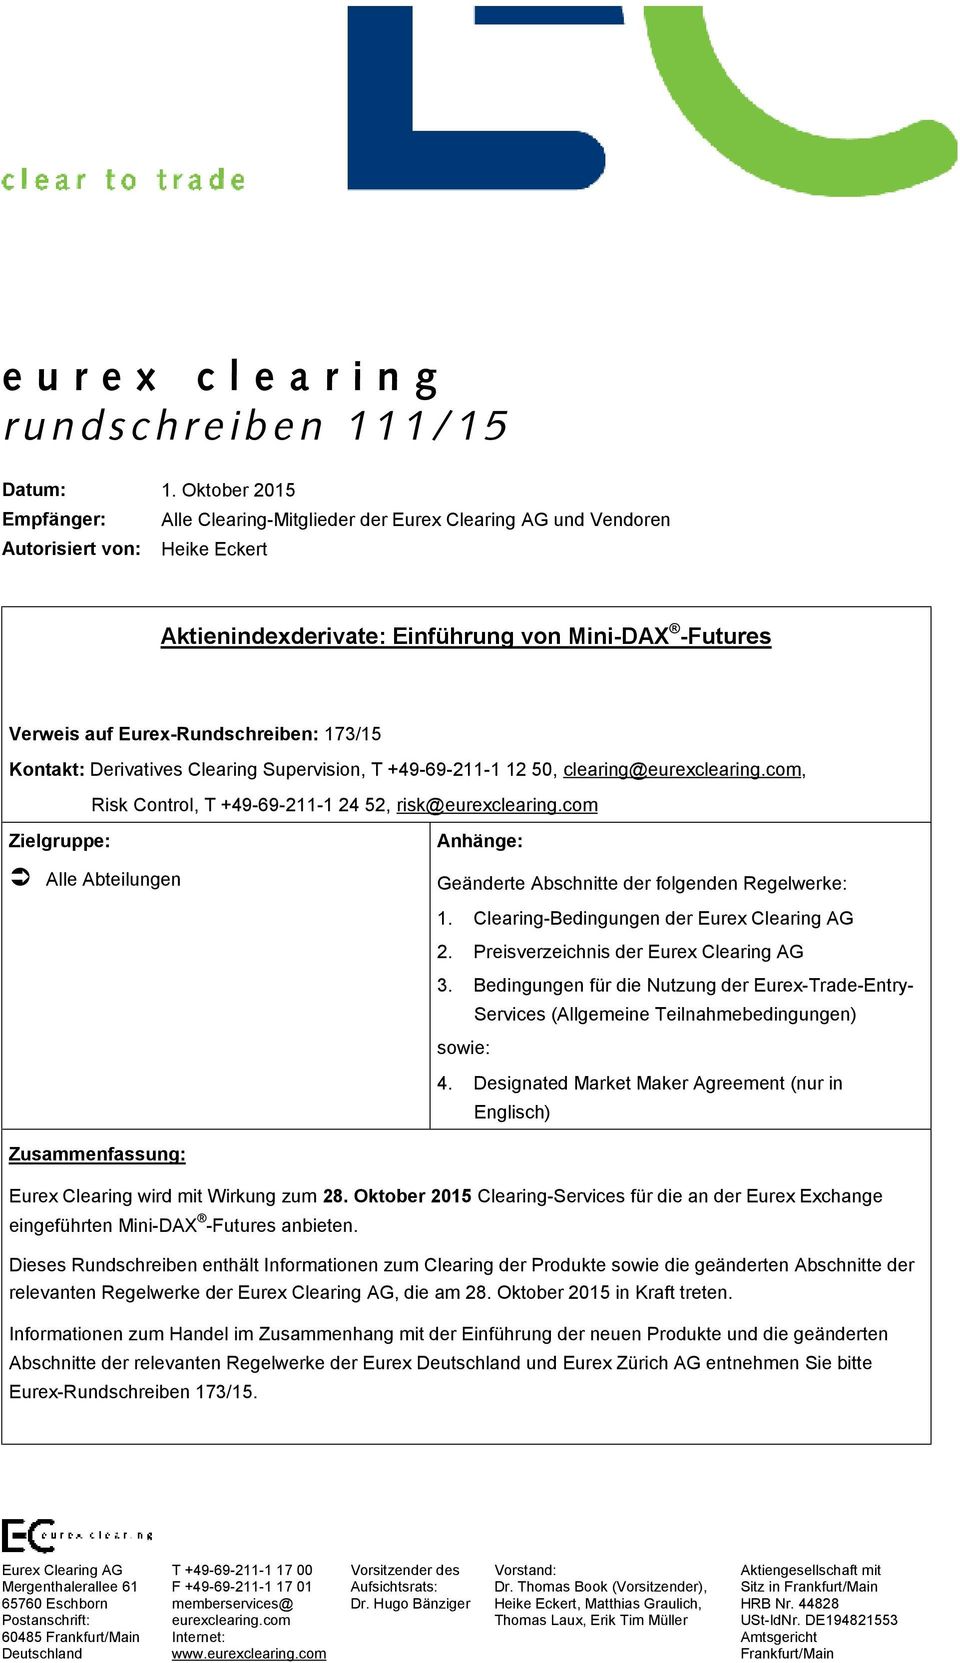 Eurex-Rundschreiben: 173/15 Kontakt: Derivatives Clearing Supervision, T +49-69-211-1 12 50, clearing@eurexclearing.com, Risk Control, T +49-69-211-1 24 52, risk@eurexclearing.